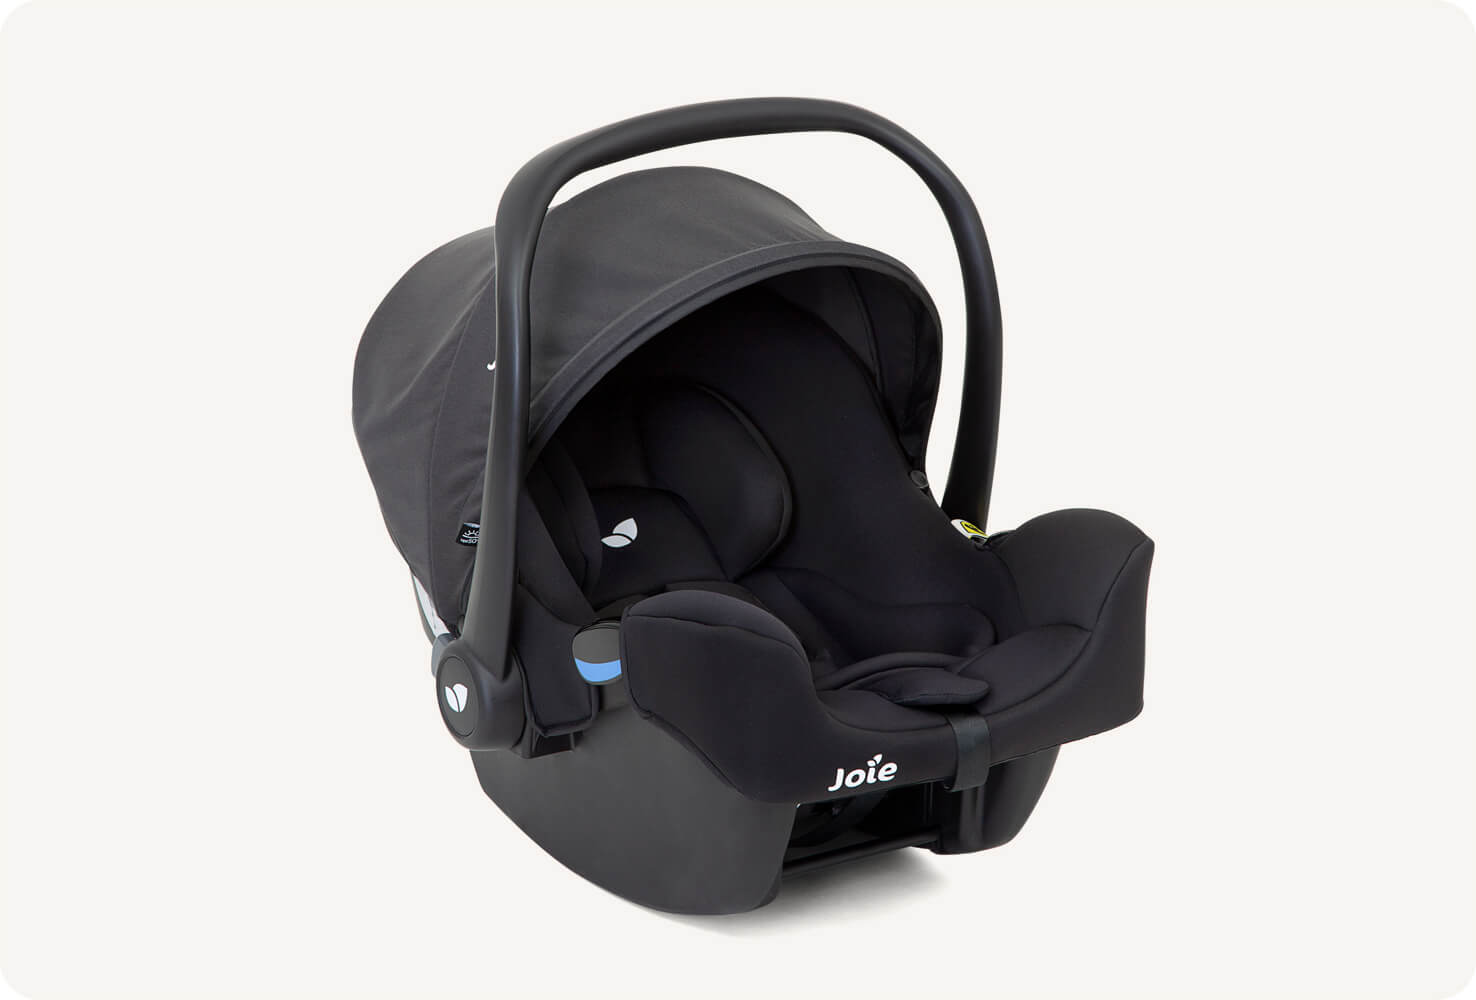  Joie baby carrier in black on a right angle. 